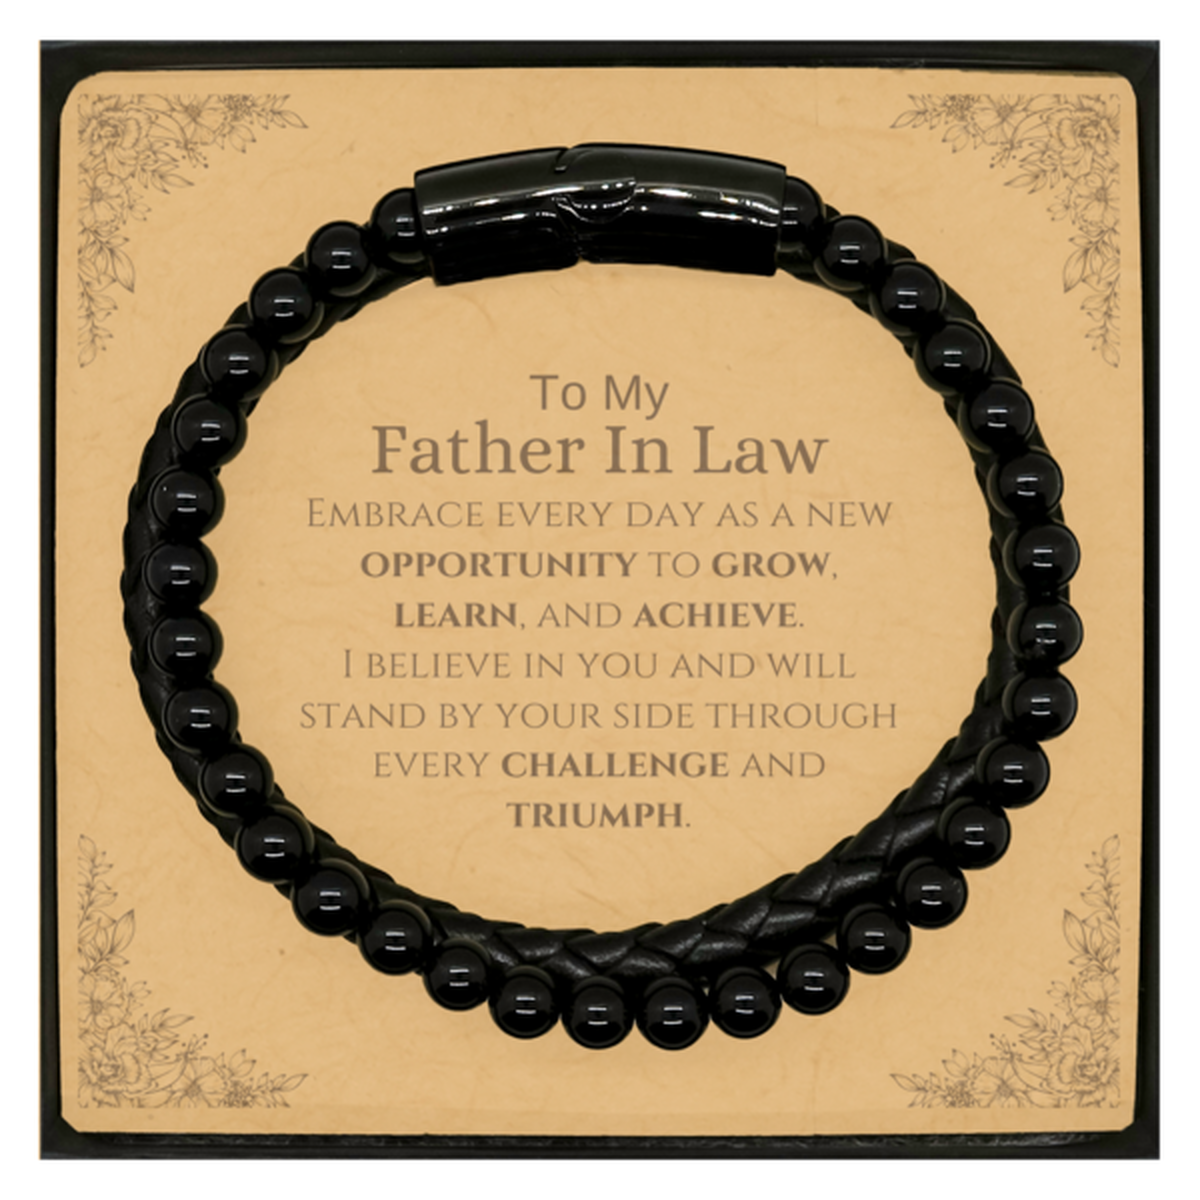 To My Father In Law Gifts, I believe in you and will stand by your side, Inspirational Stone Leather Bracelets For Father In Law, Birthday Christmas Motivational Father In Law Gifts